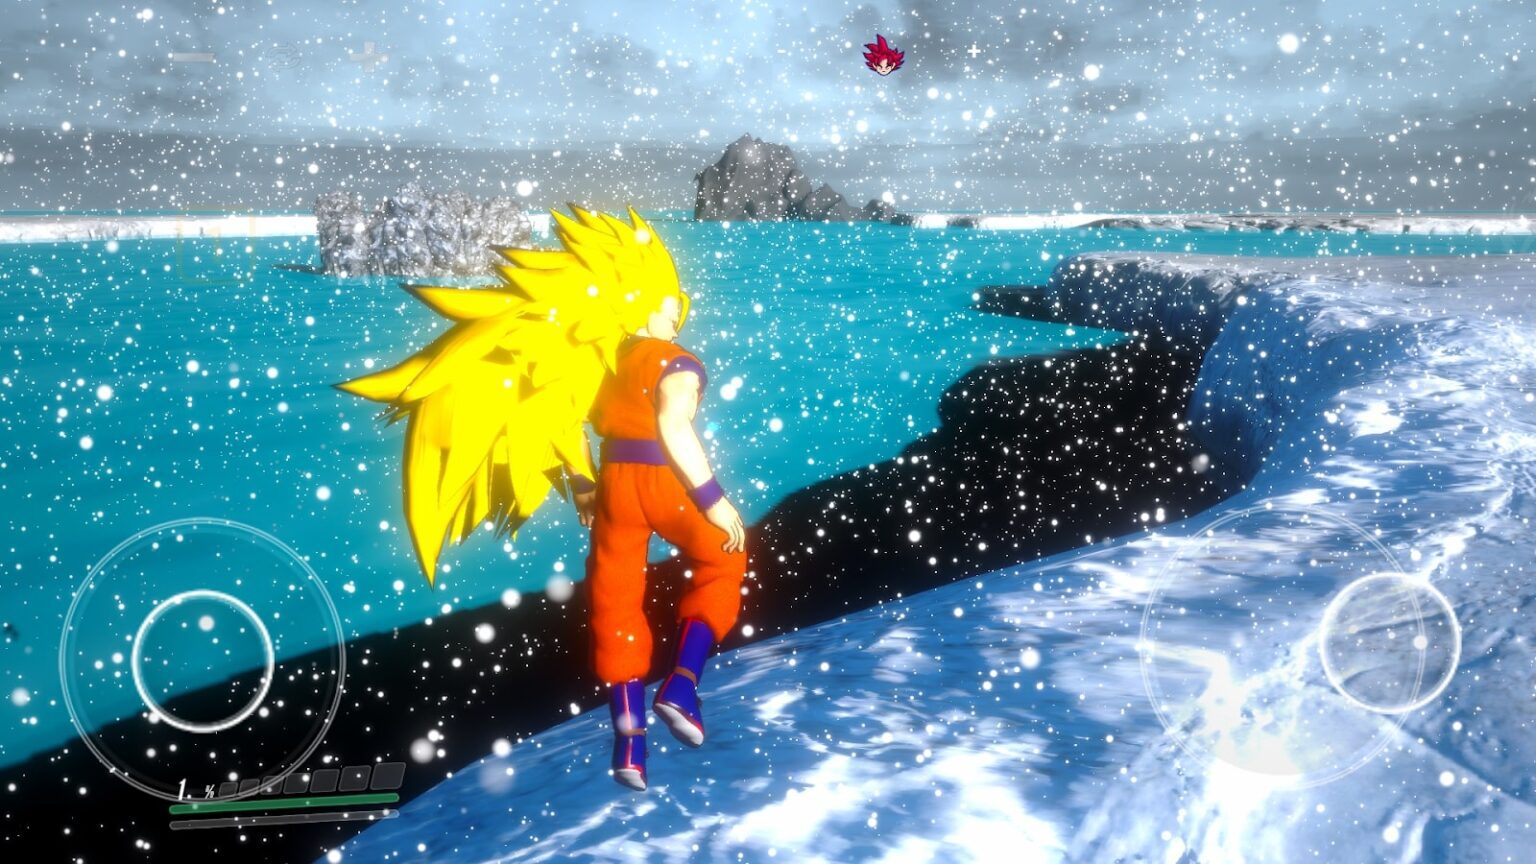 unreal engine dragon ball z full download